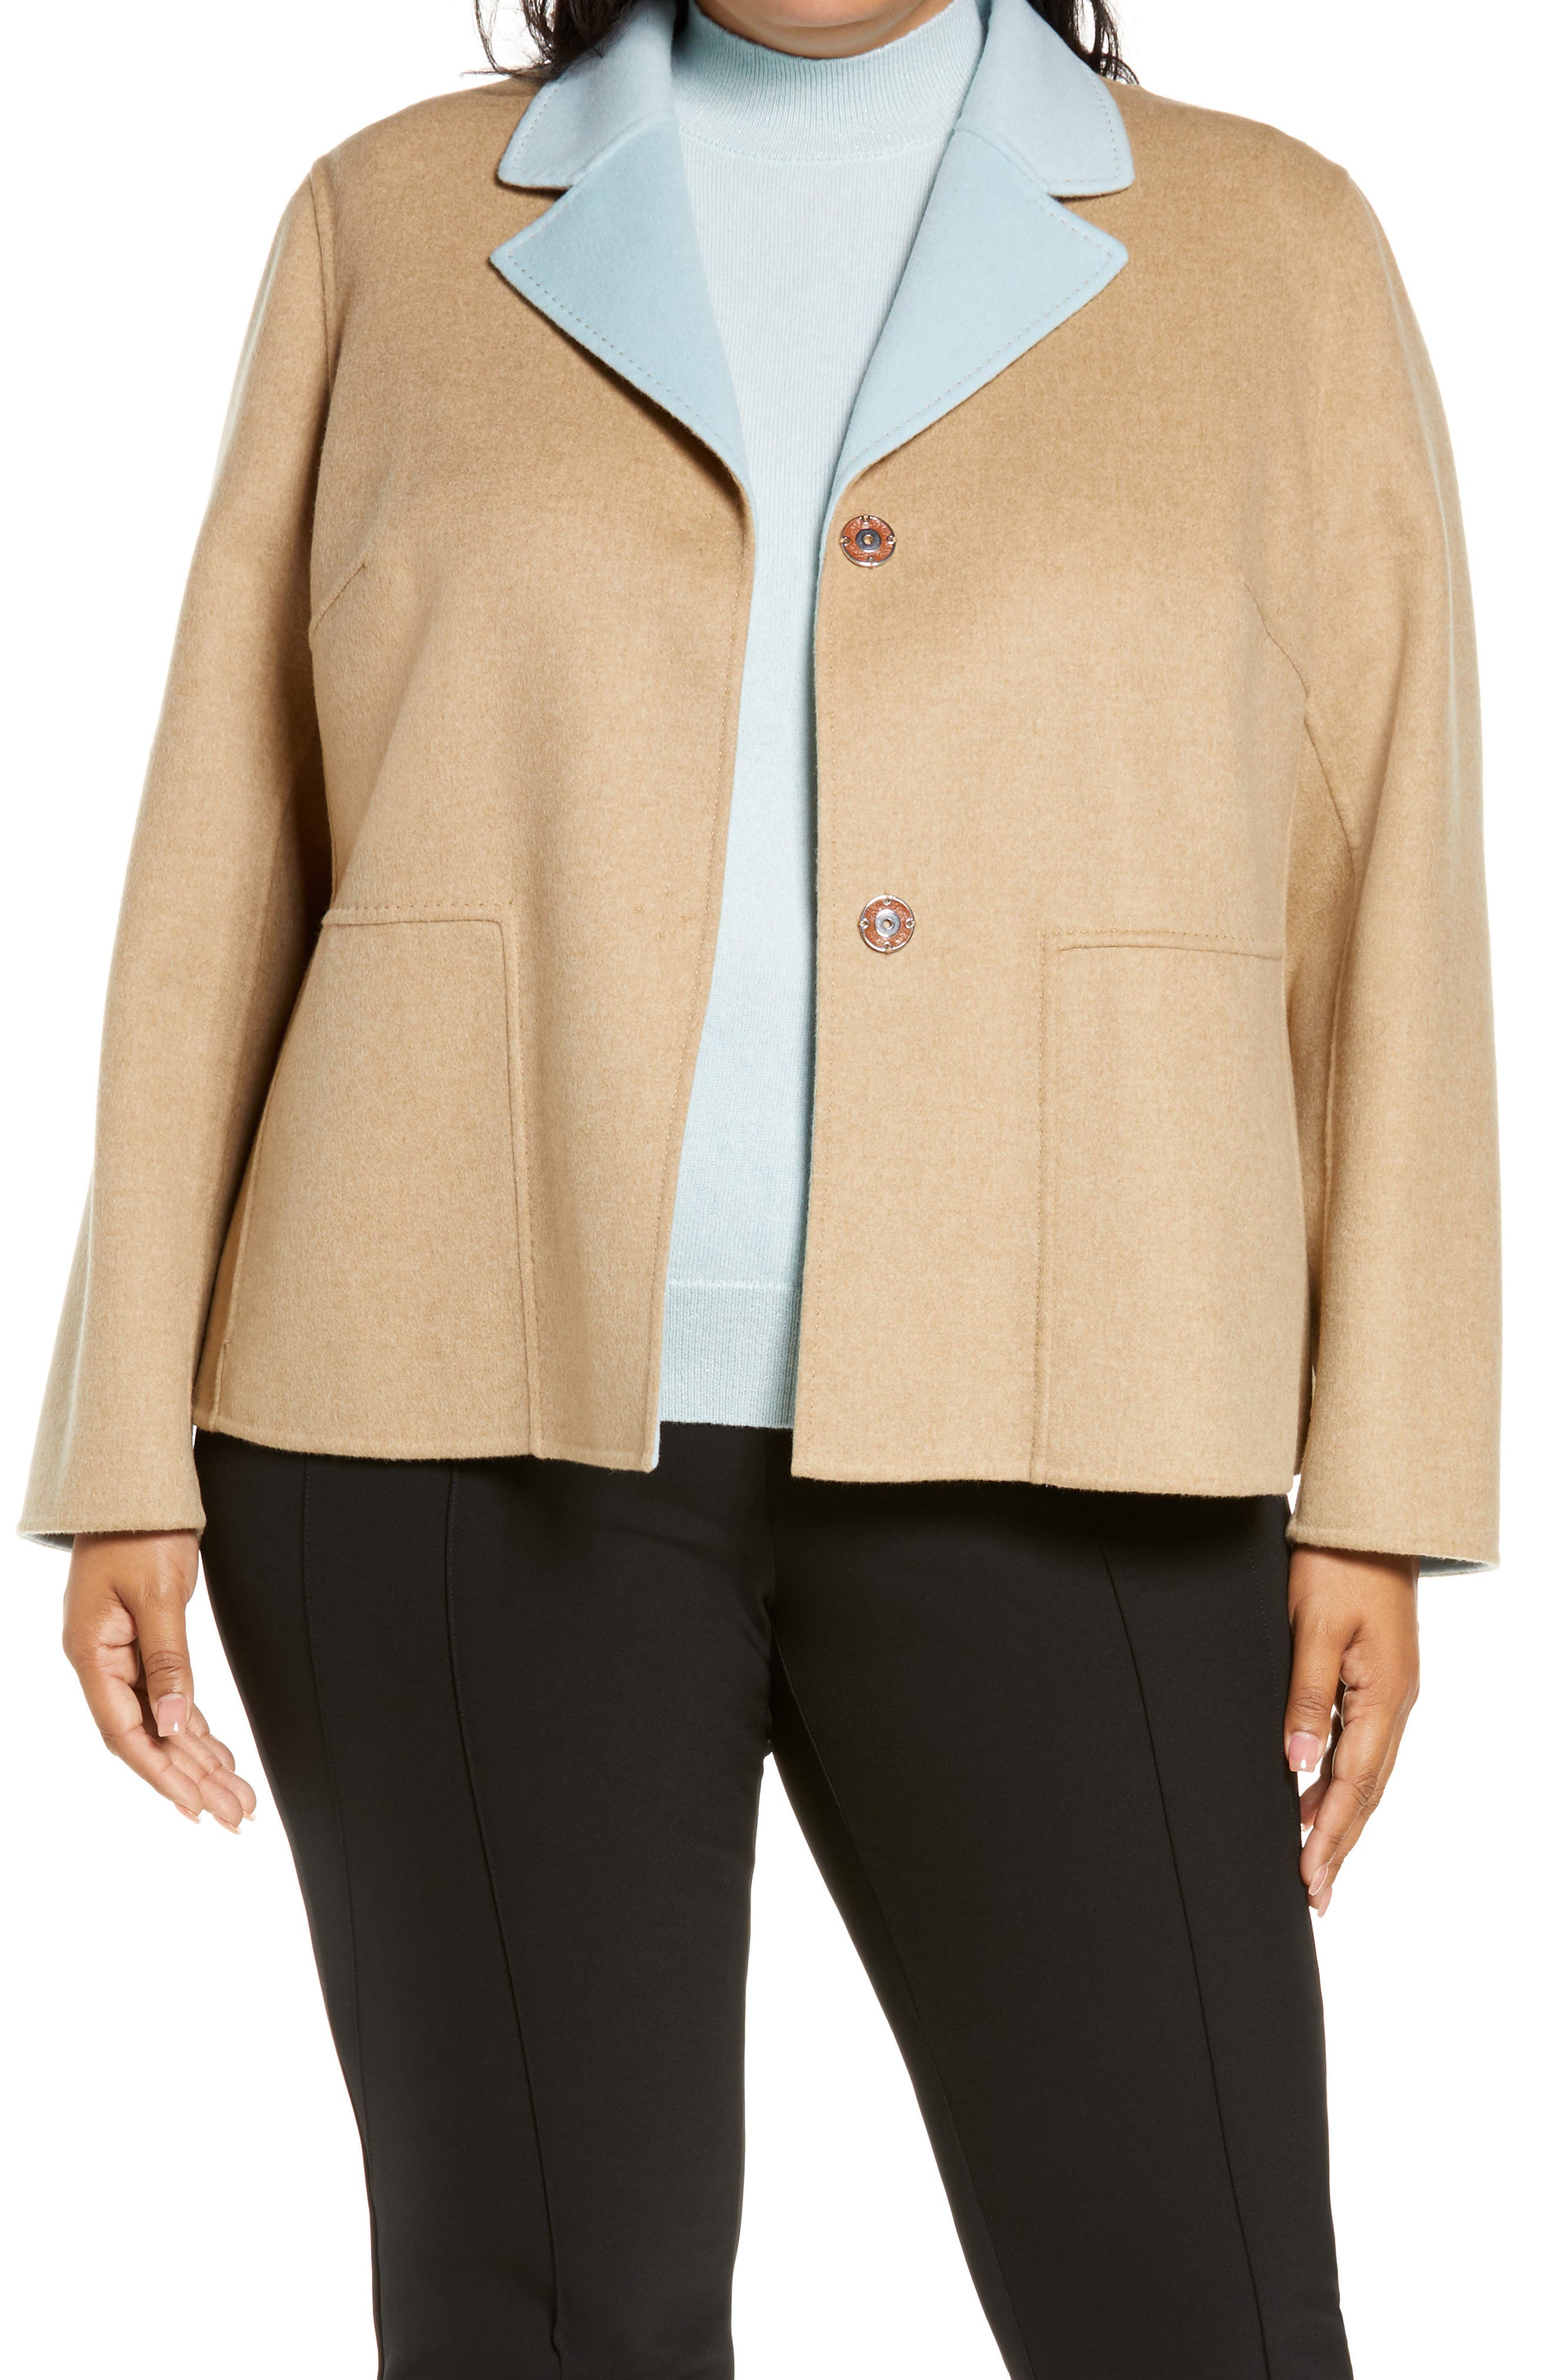 women's plus size suits for work